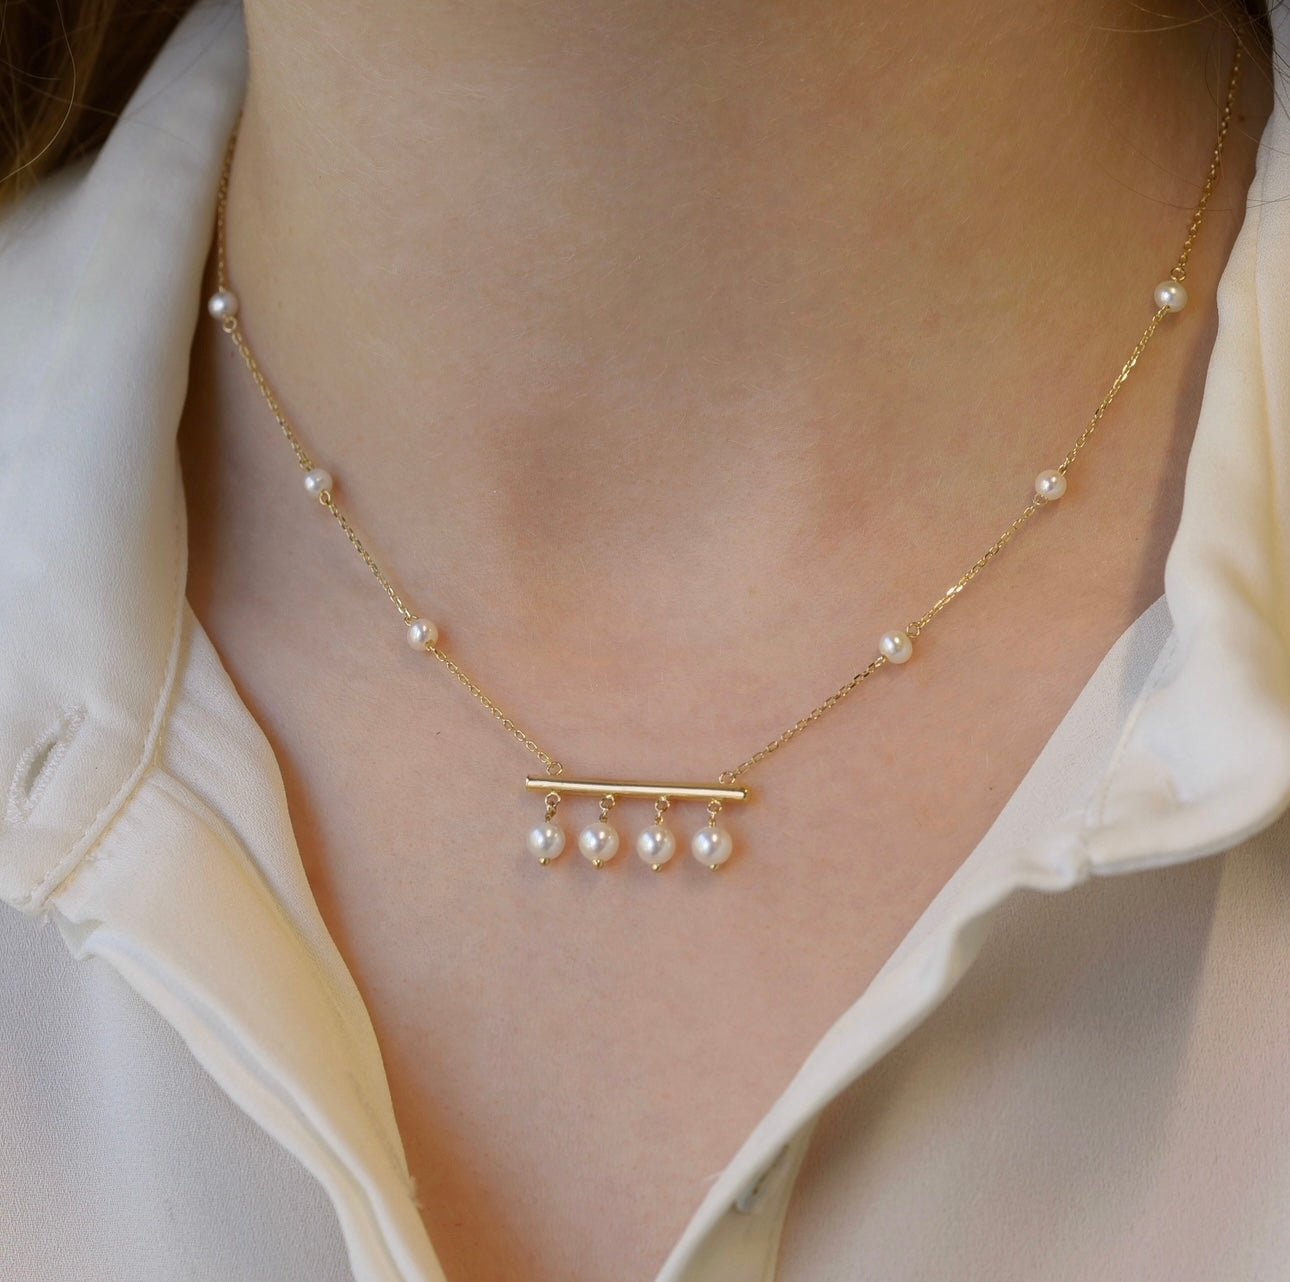 Reeva Necklace in Freshwater Pearl - 18k Gold - Lynor